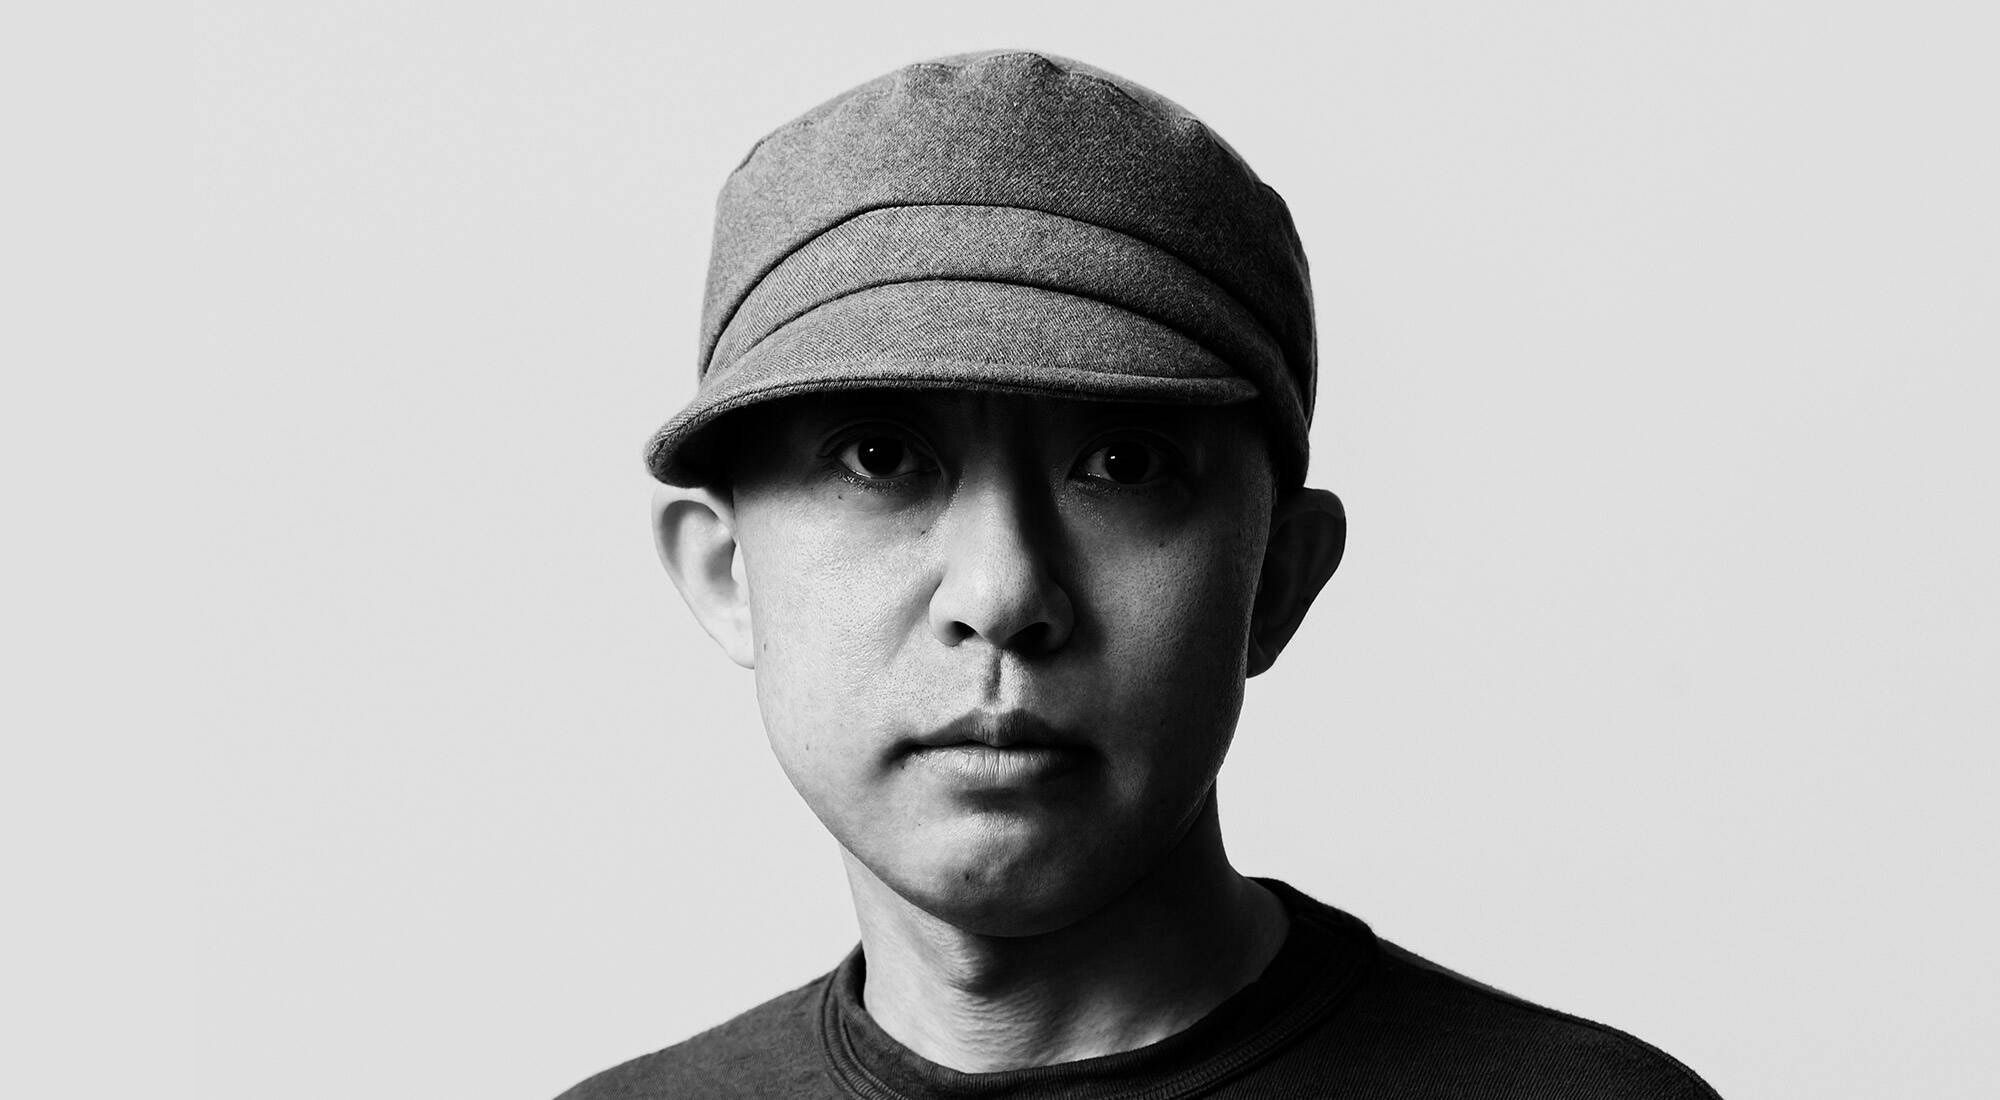 Everything you need to know about Kenzo's new creative director, Nigo